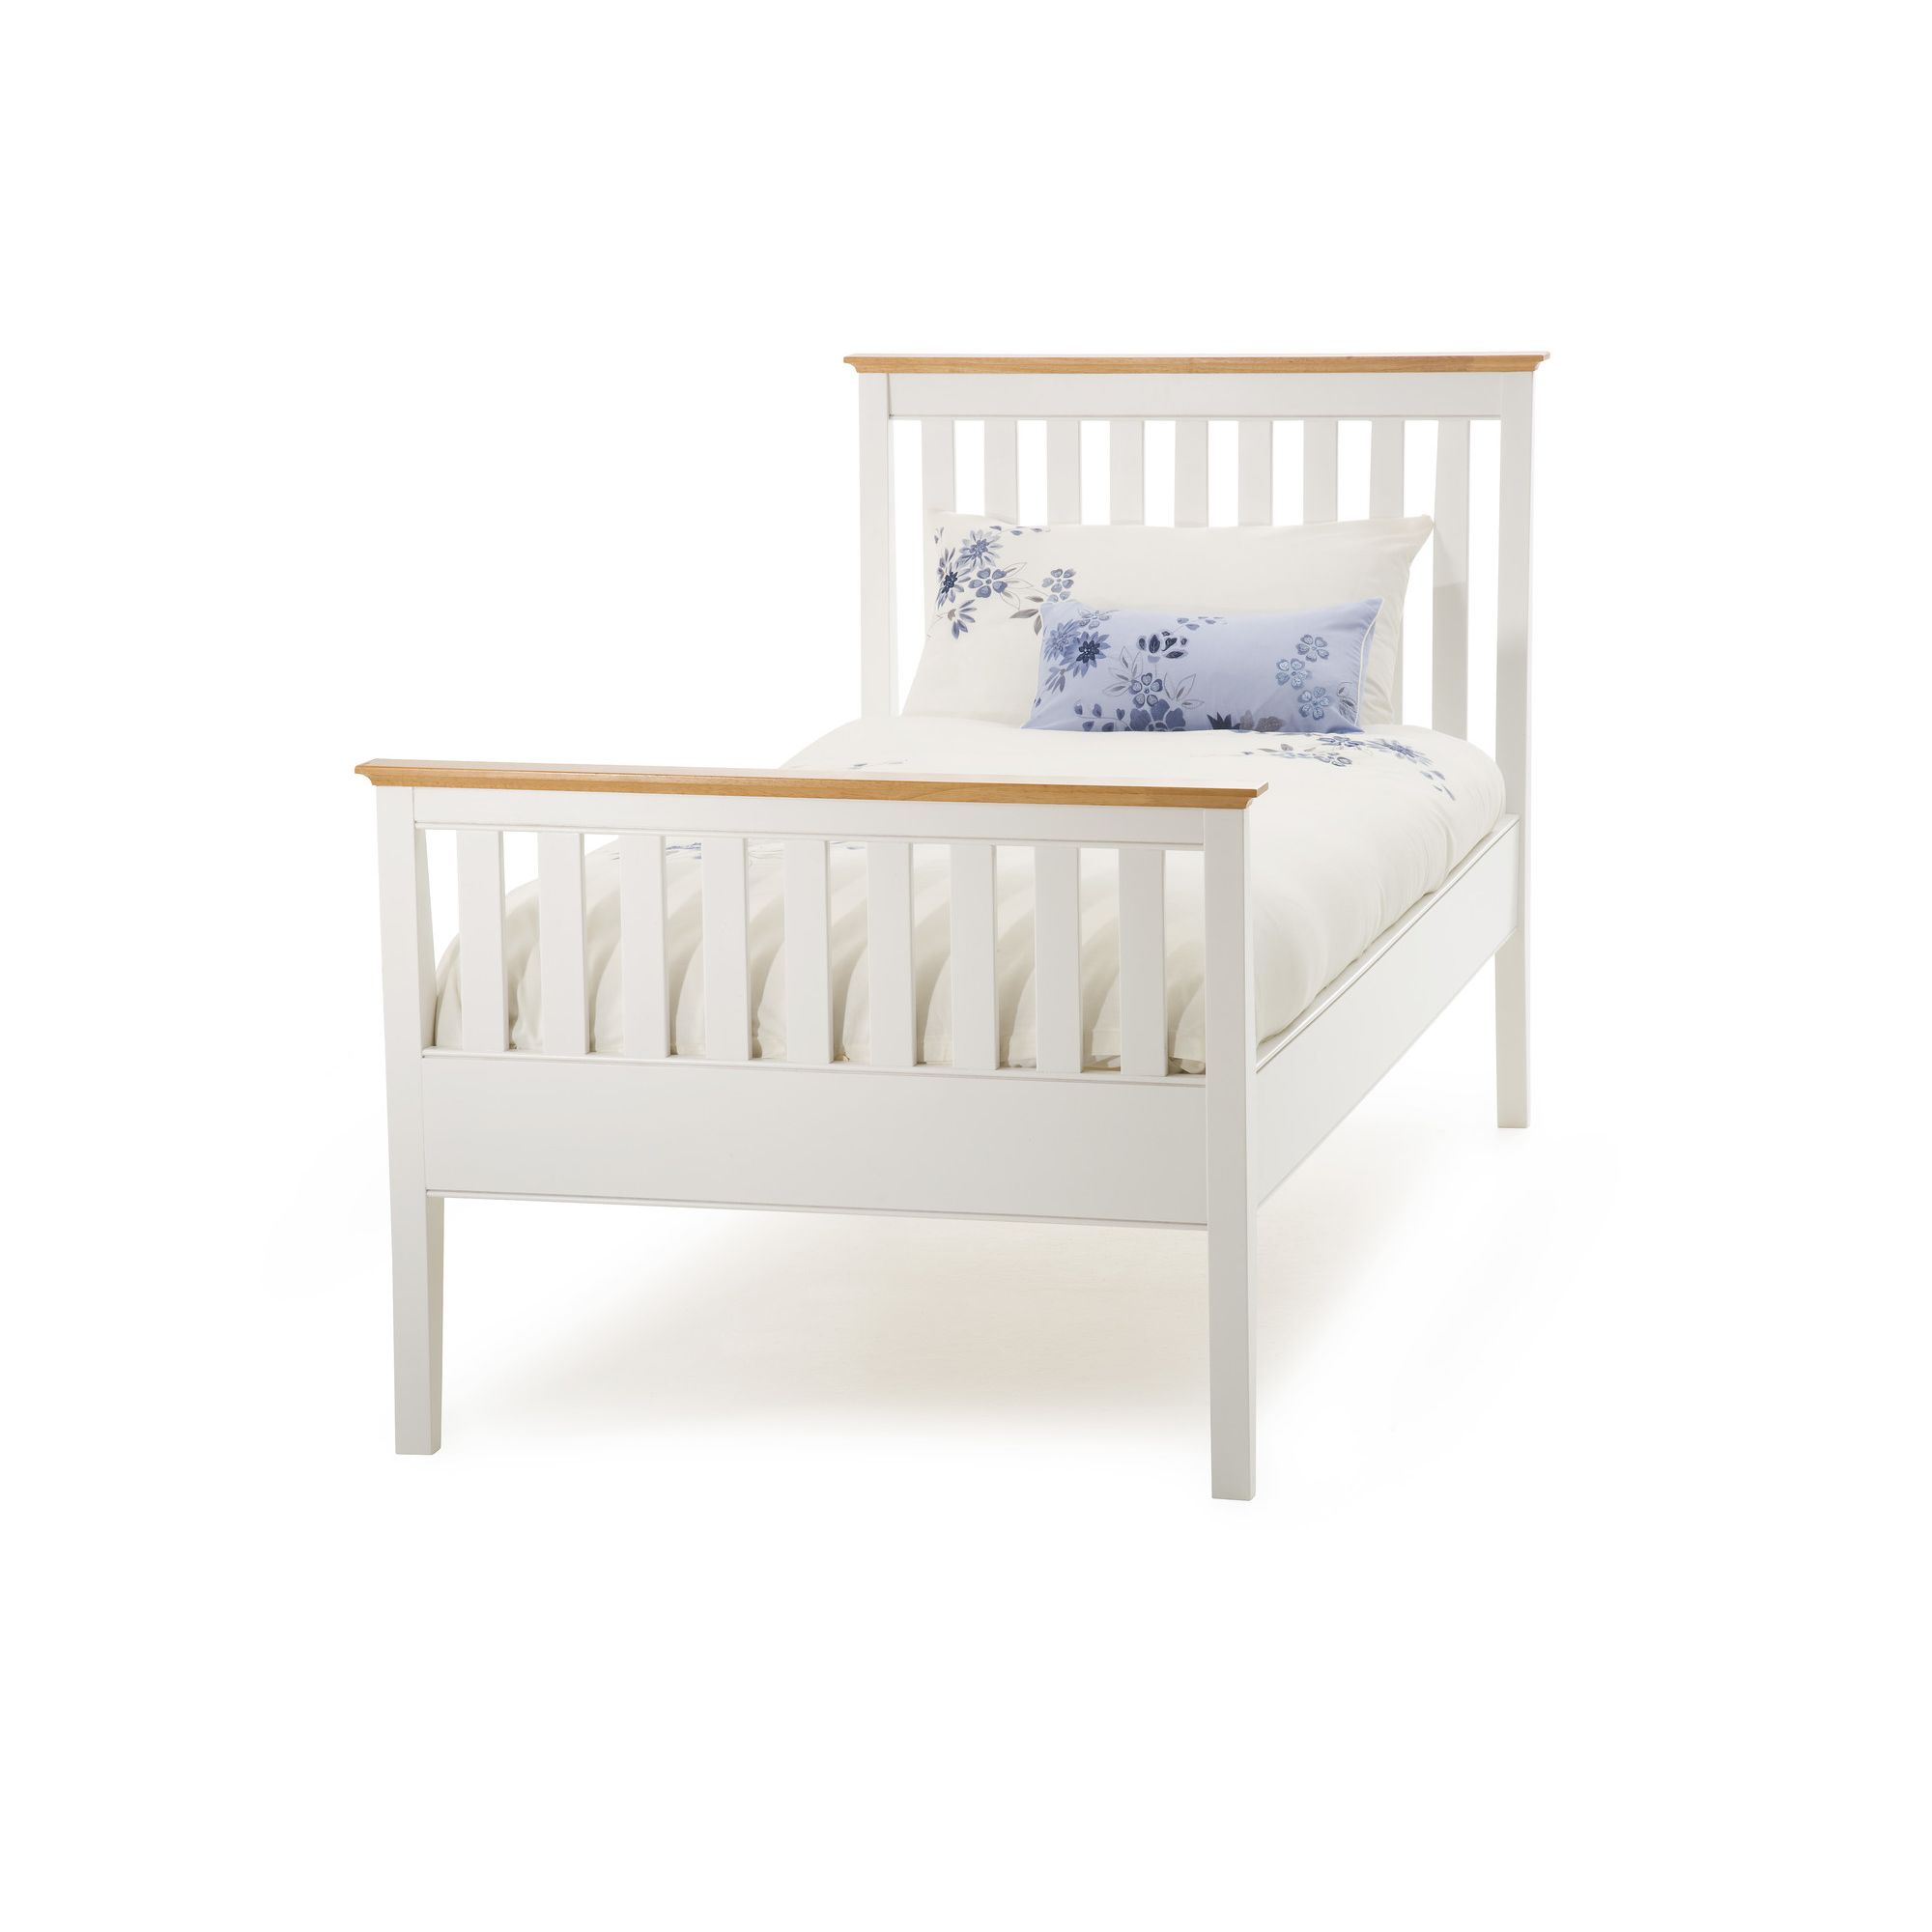 Serene Furnishings Grace High Foot End Bed - Golden Cherry - Double at Tesco Direct